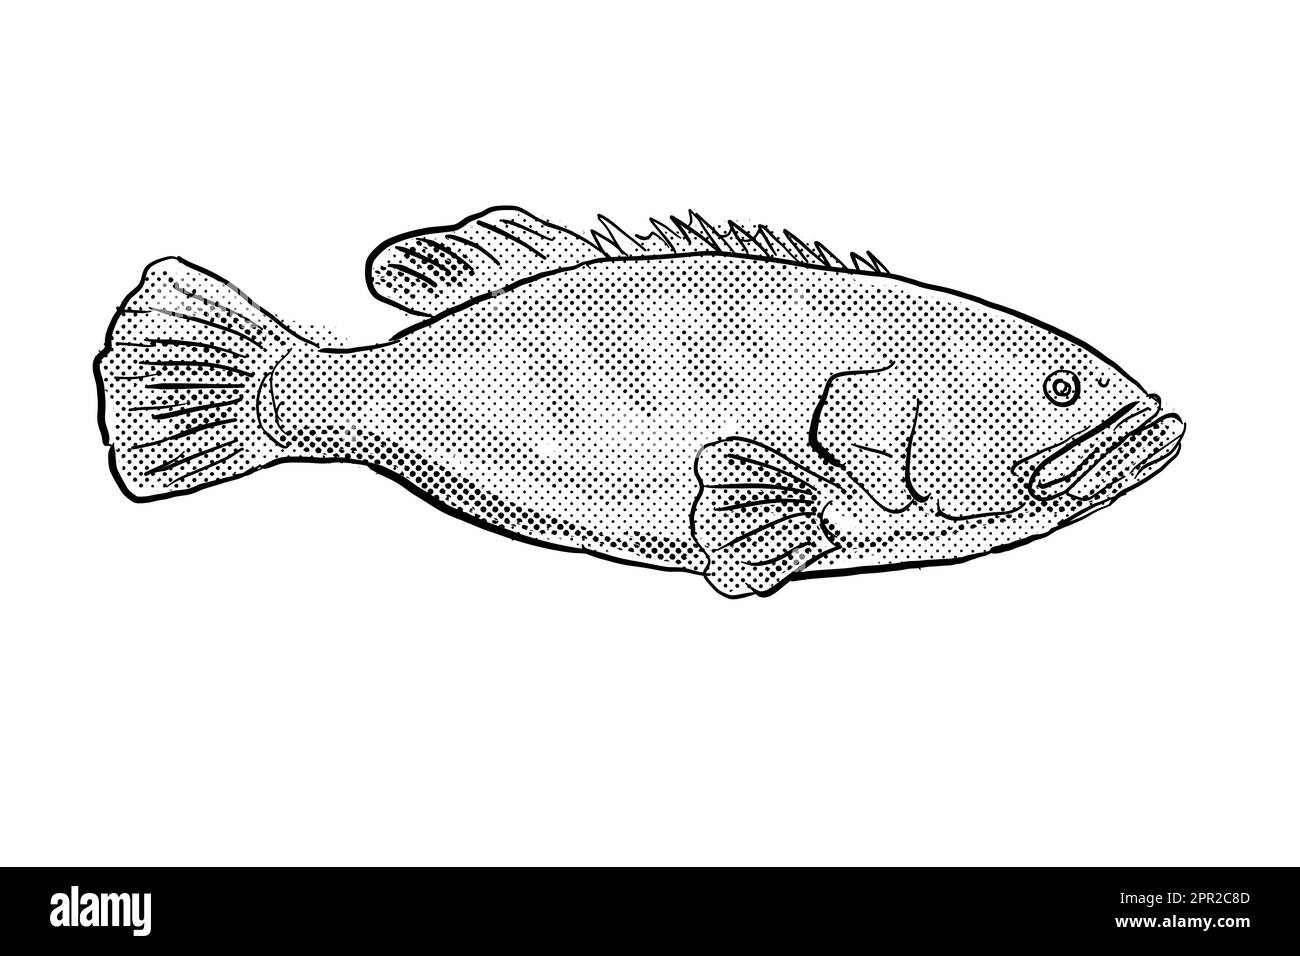 Cartoon style line drawing of a giant grouper Epinephelus lanceolatus,  Queensland grouper, brindle grouper or mottled-brown sea bass a fish endemic t Stock Photo